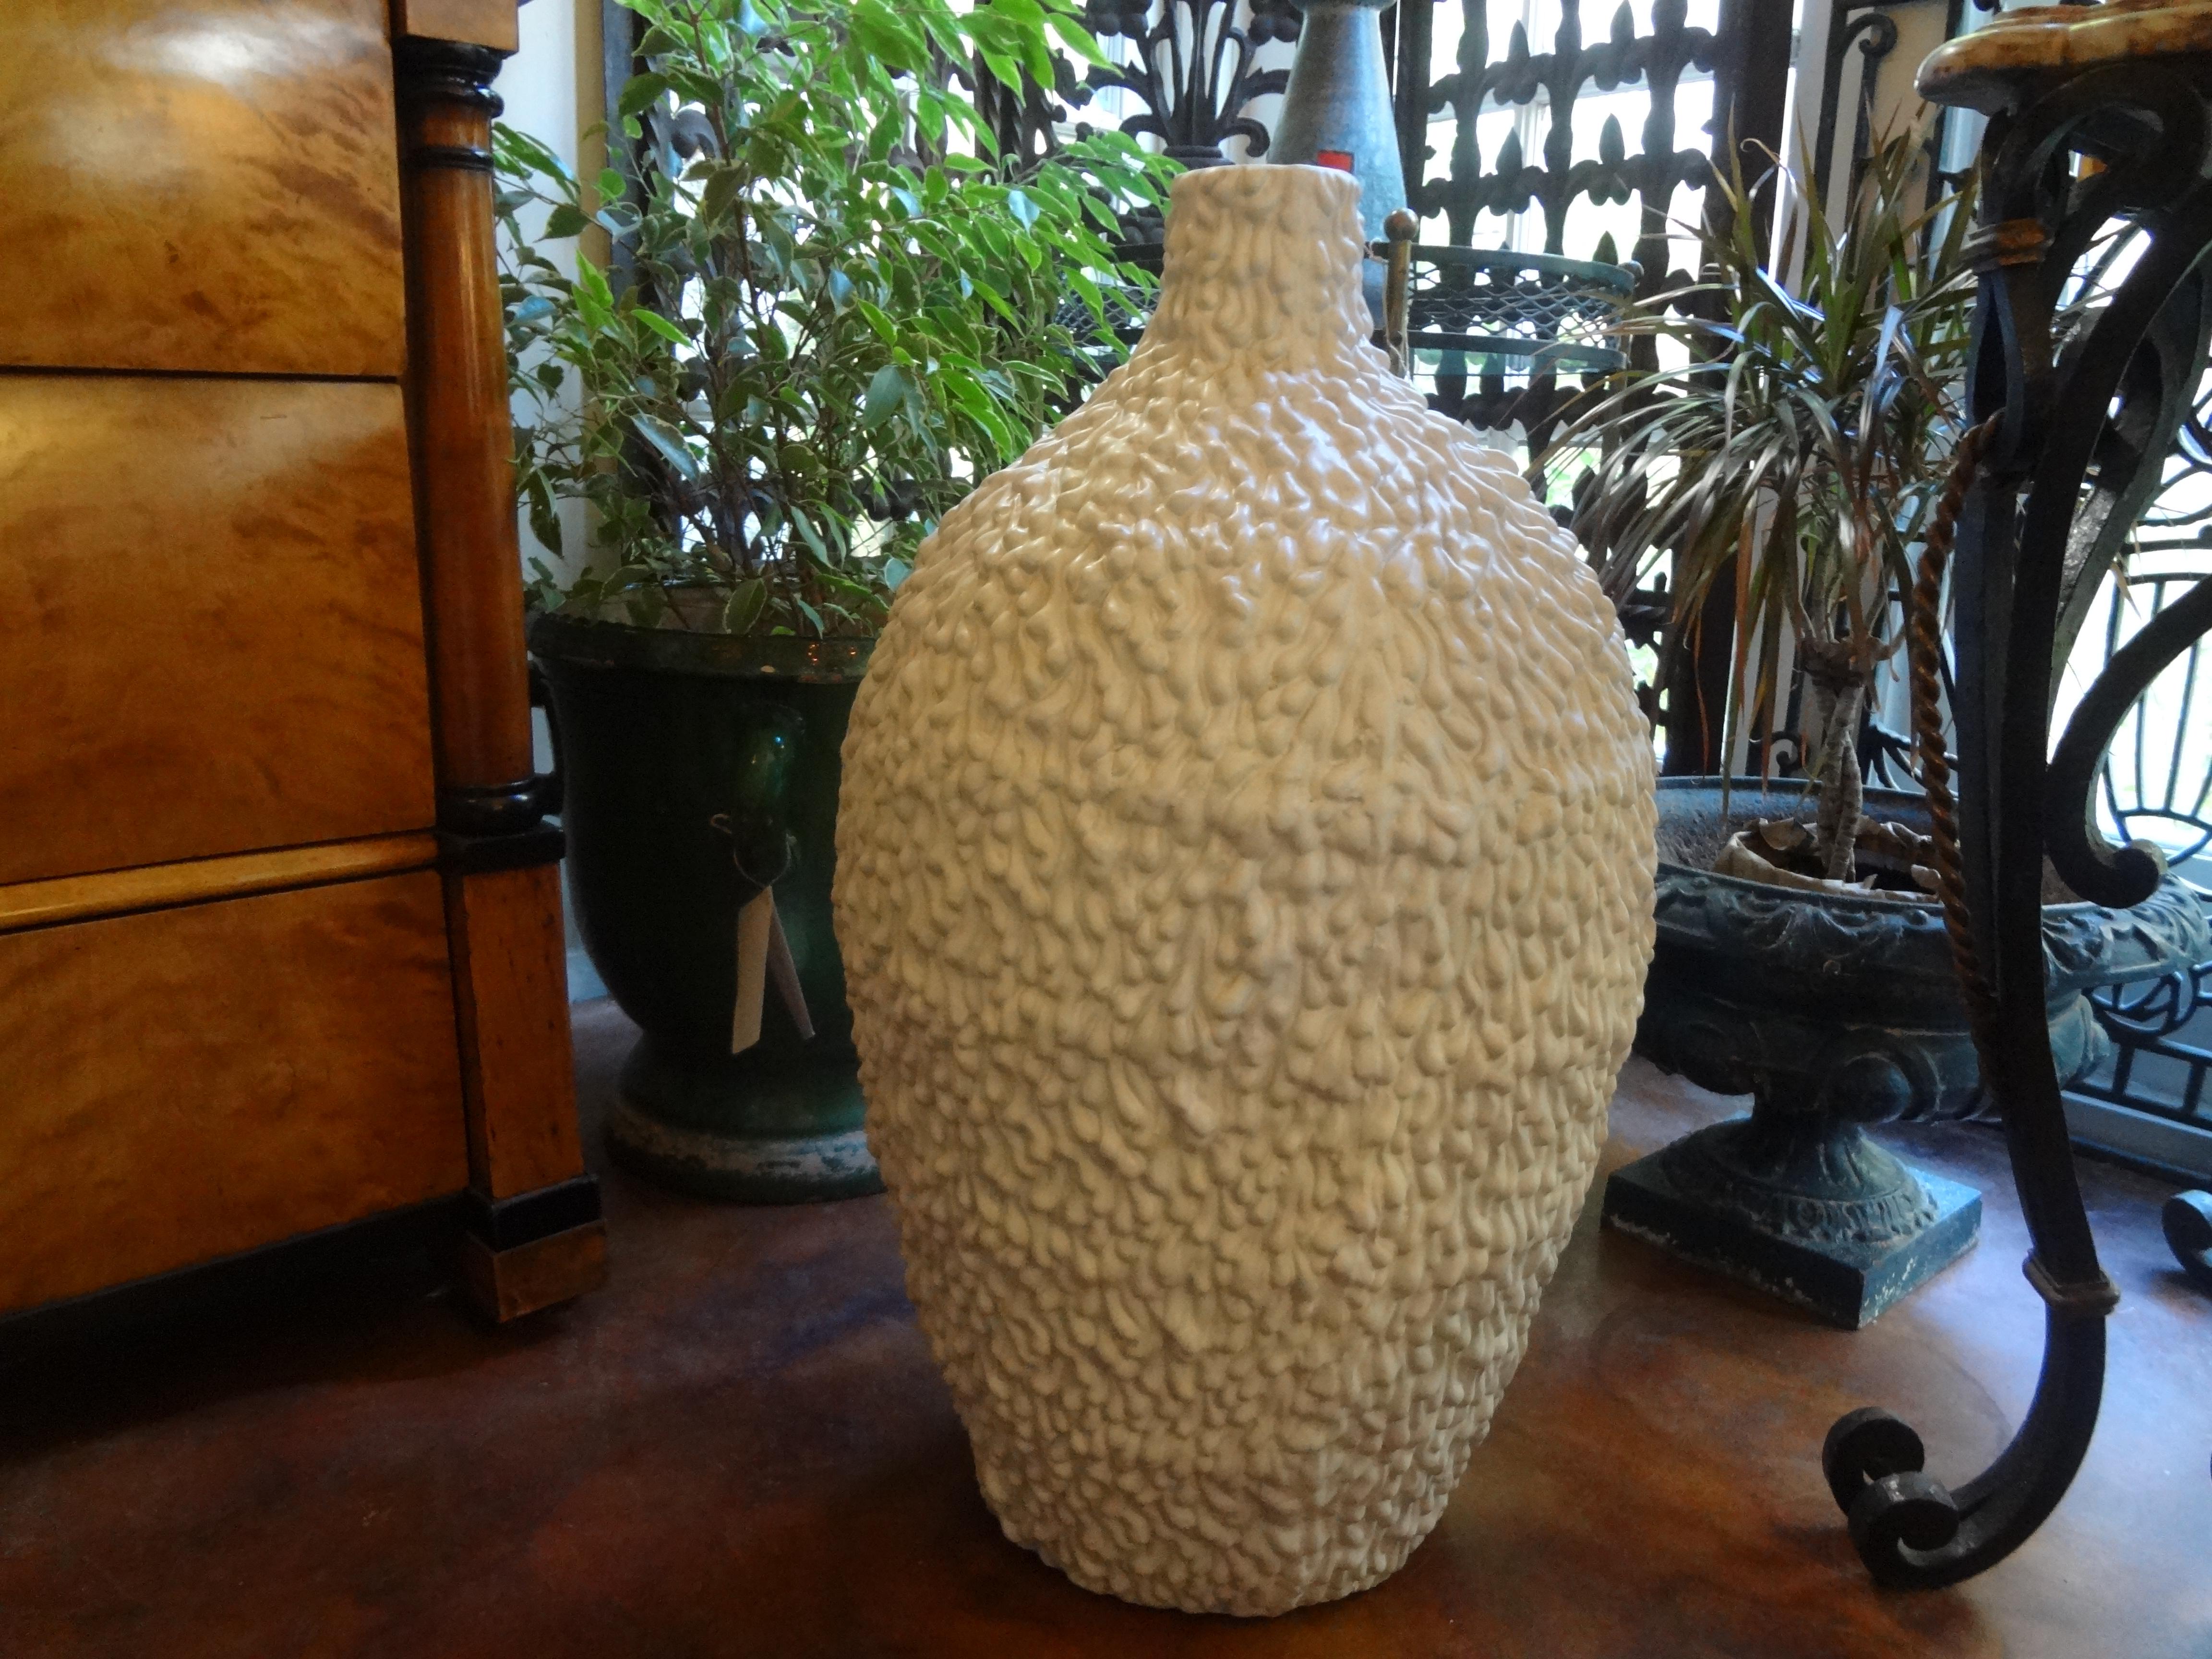 Huge Midcentury Drip Glaze Ceramic Urn.
Huge white Mid-Century Modern drip glaze ceramic urn, vessel or vase. This large, 27 inch urn is a fabulous decorative accessory or could easily be converted into a table lamp.